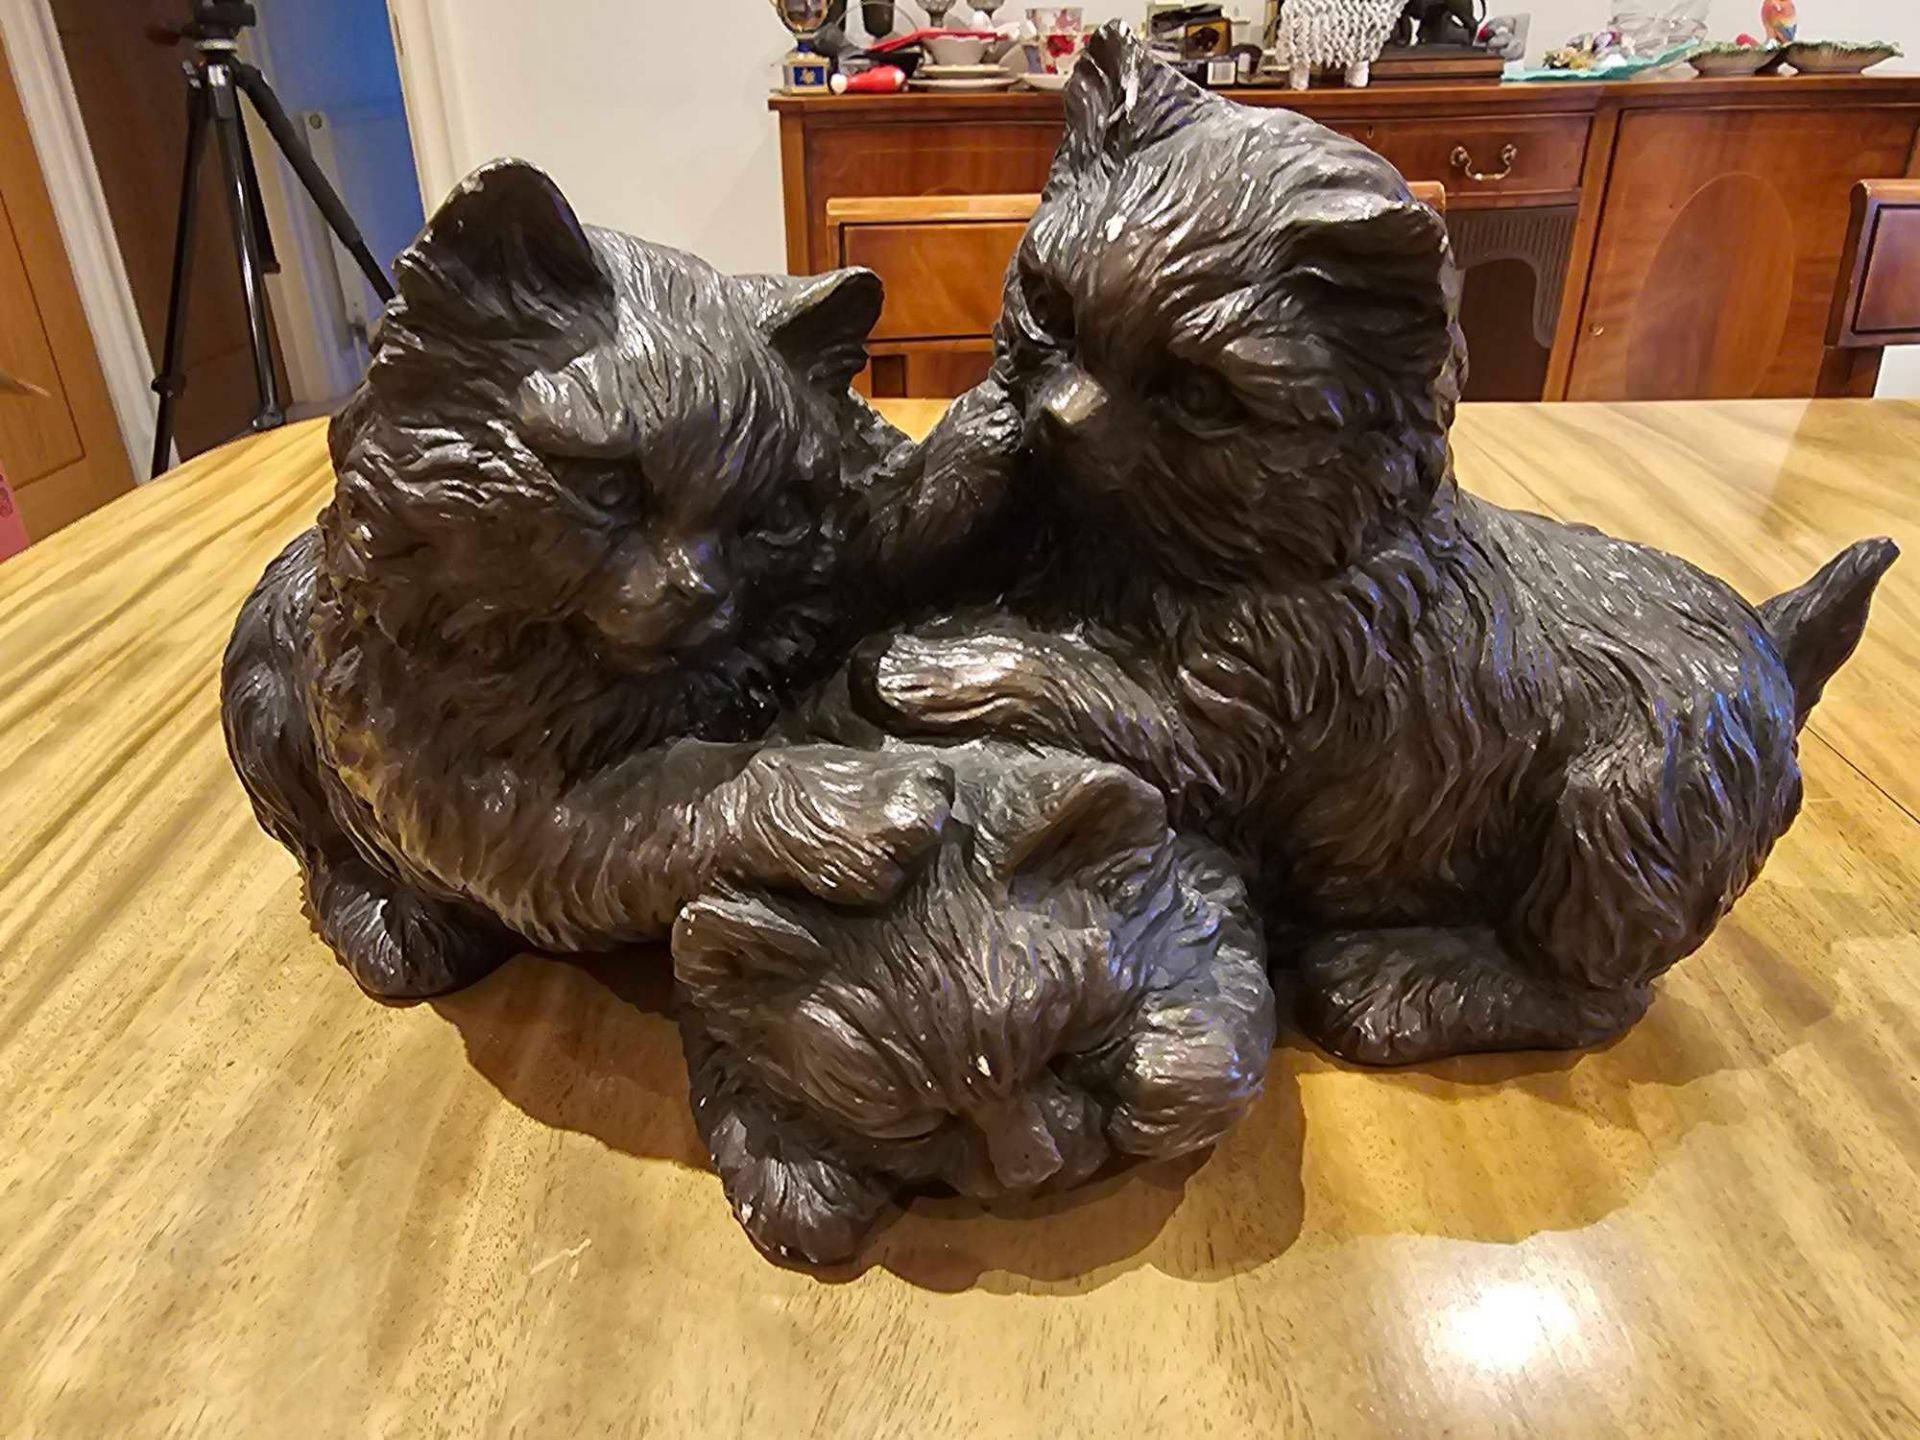 A Resin Figurine Of A Trio Of Kittens - Image 2 of 3